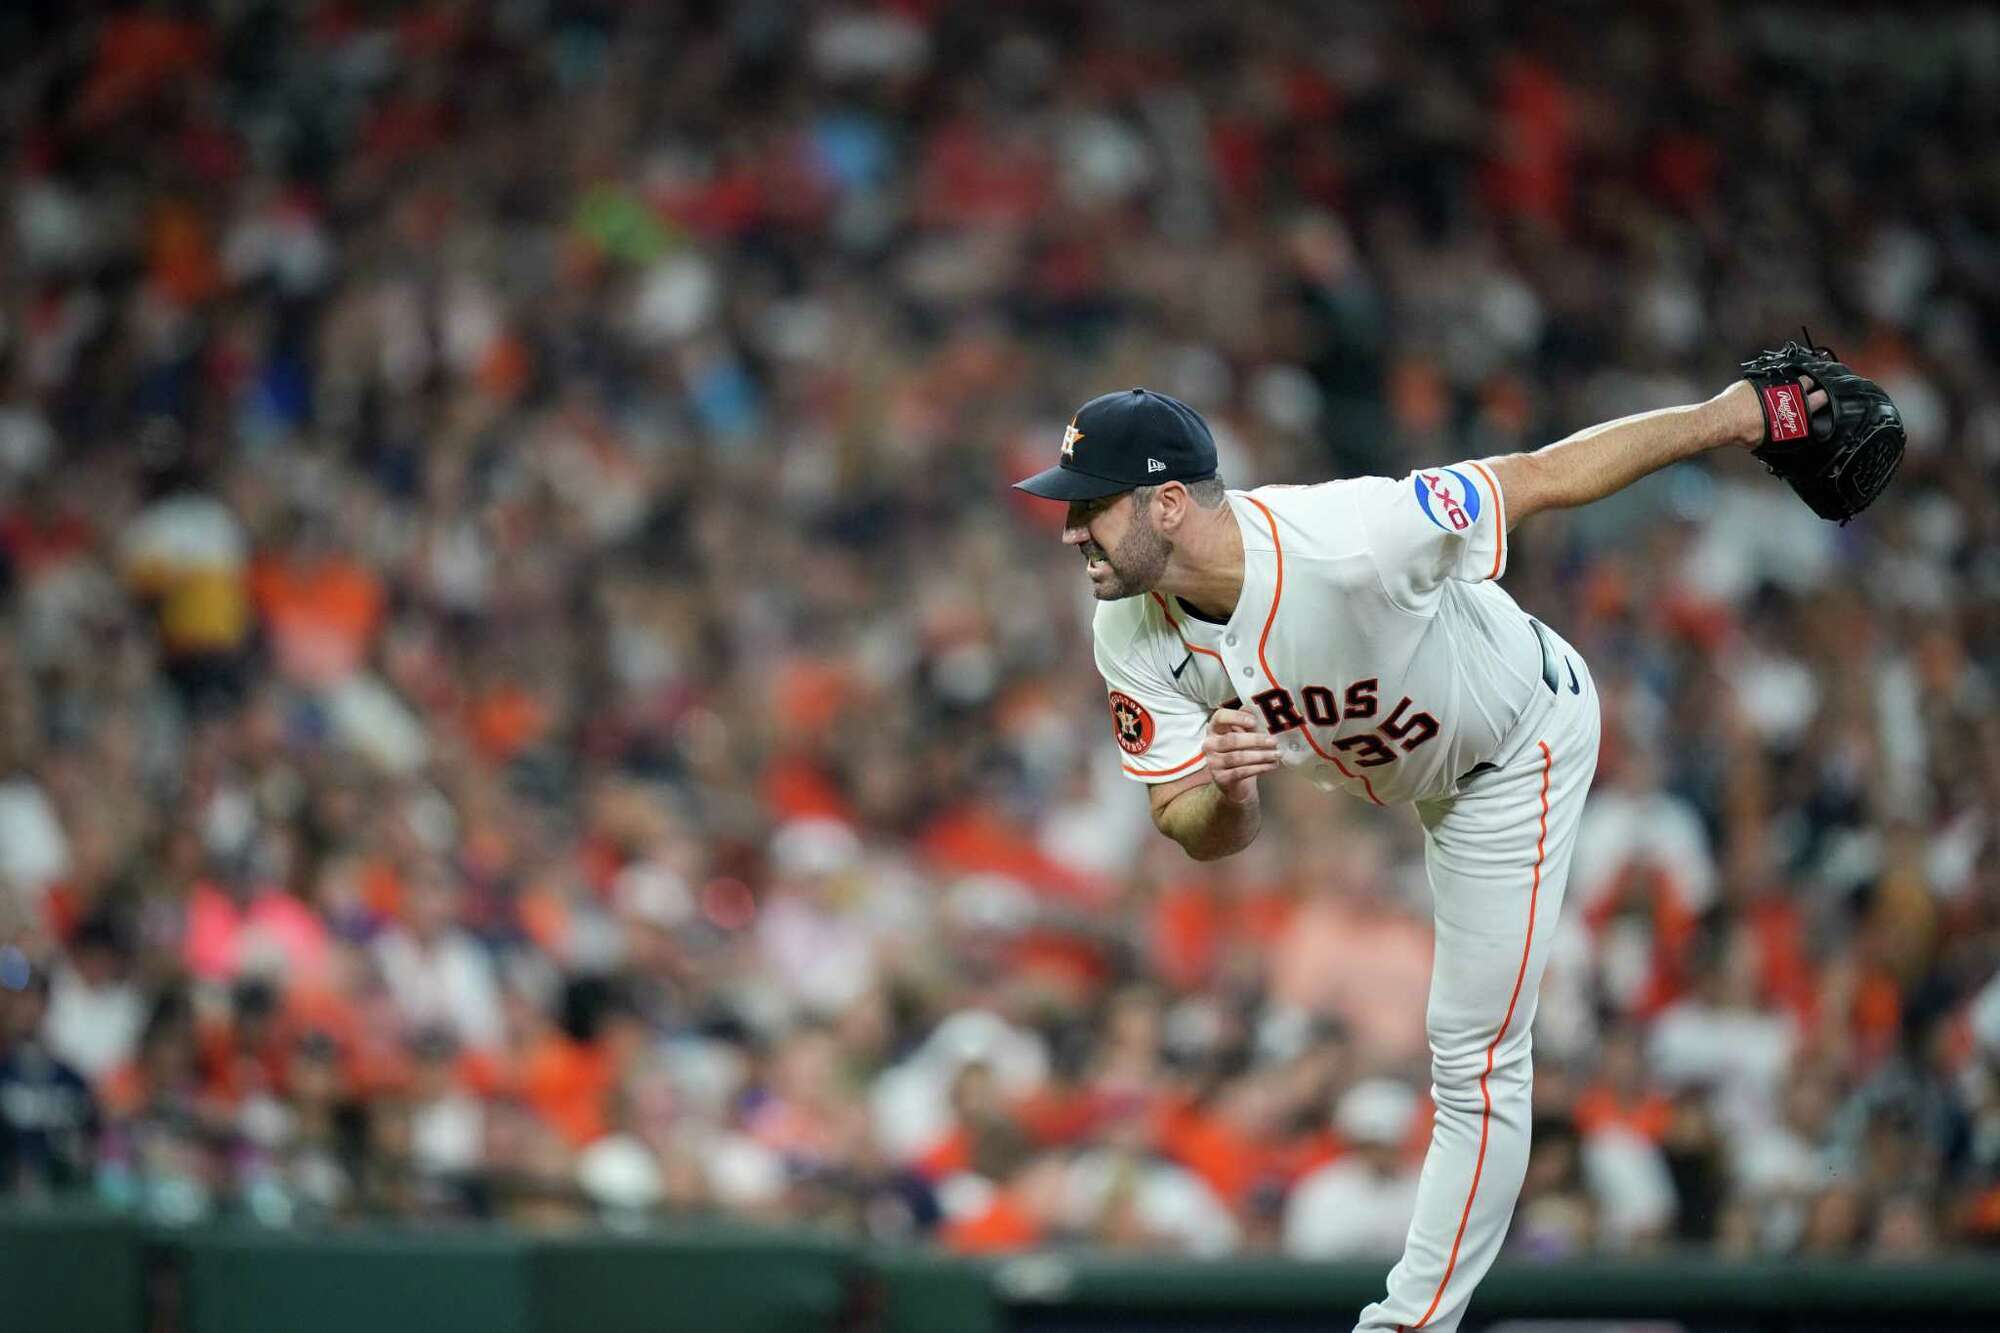 Astros vs. Rangers: ALCS matchups, including lineups and pitchers